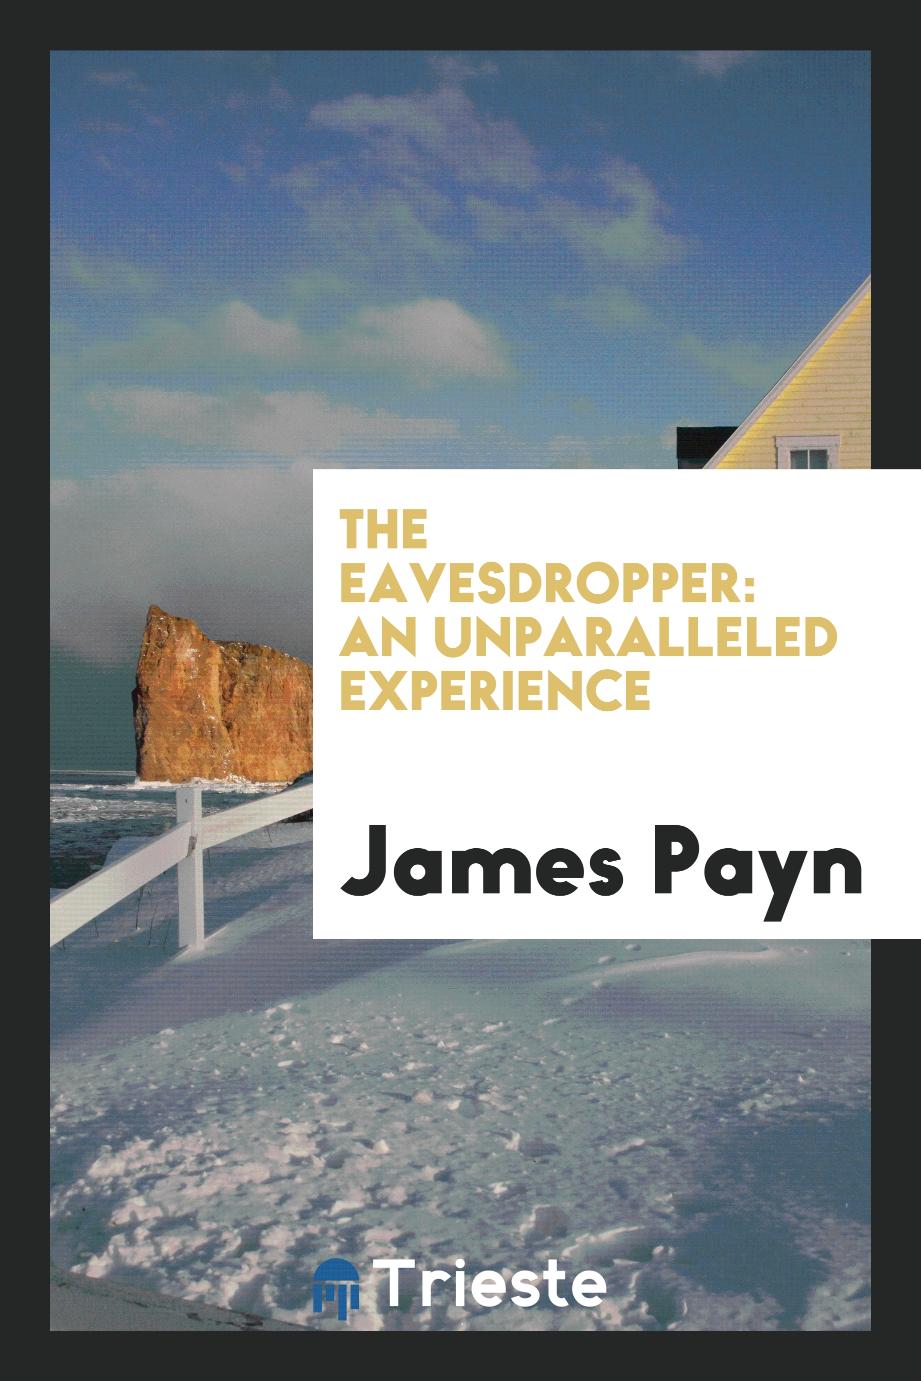 The Eavesdropper: An Unparalleled Experience